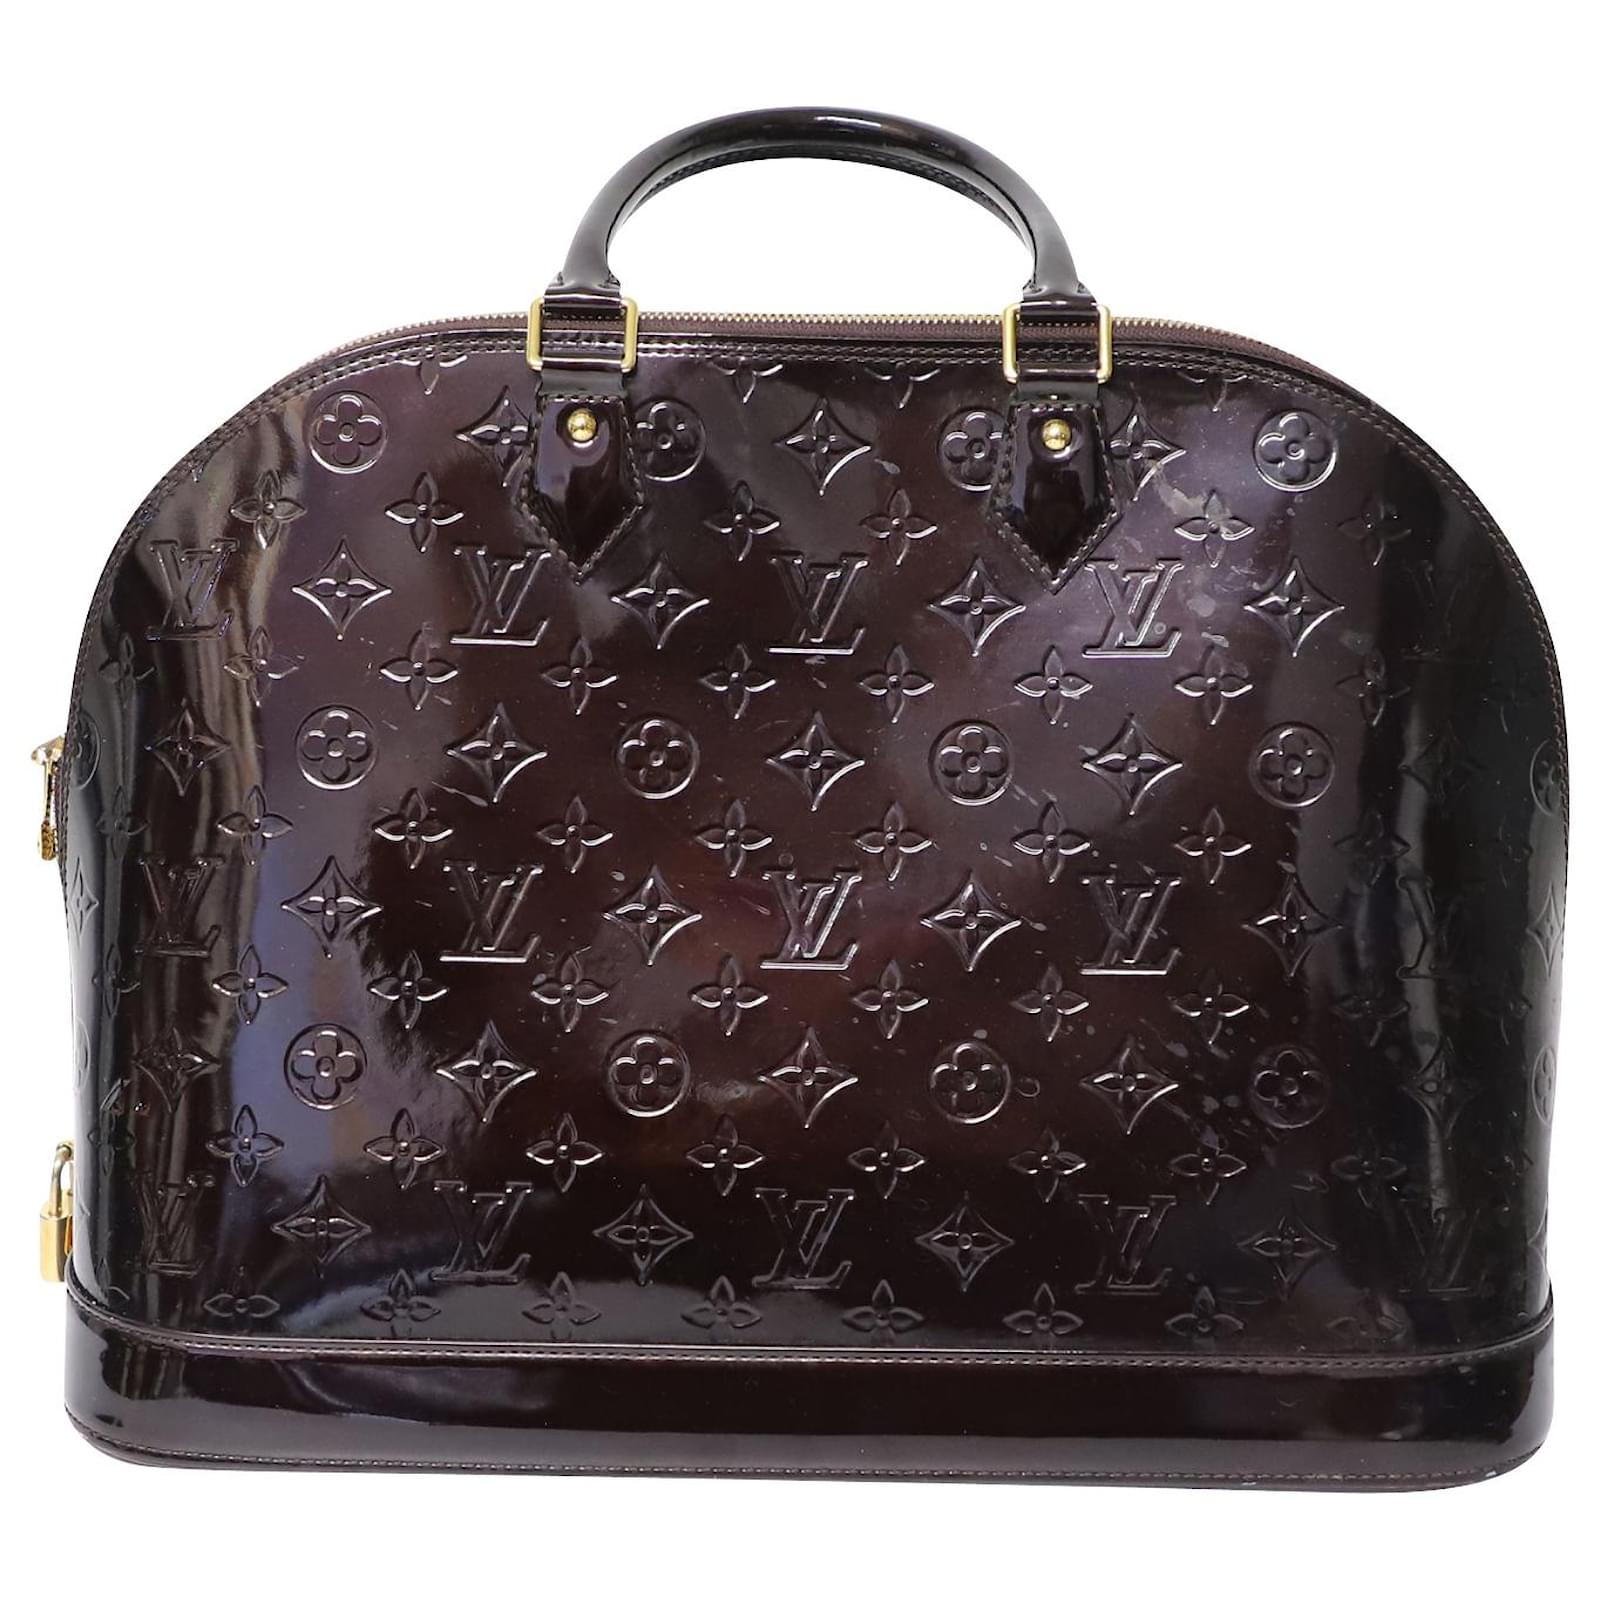 Louis Vuitton Alma MM Bag in Burgundy Patent Leather